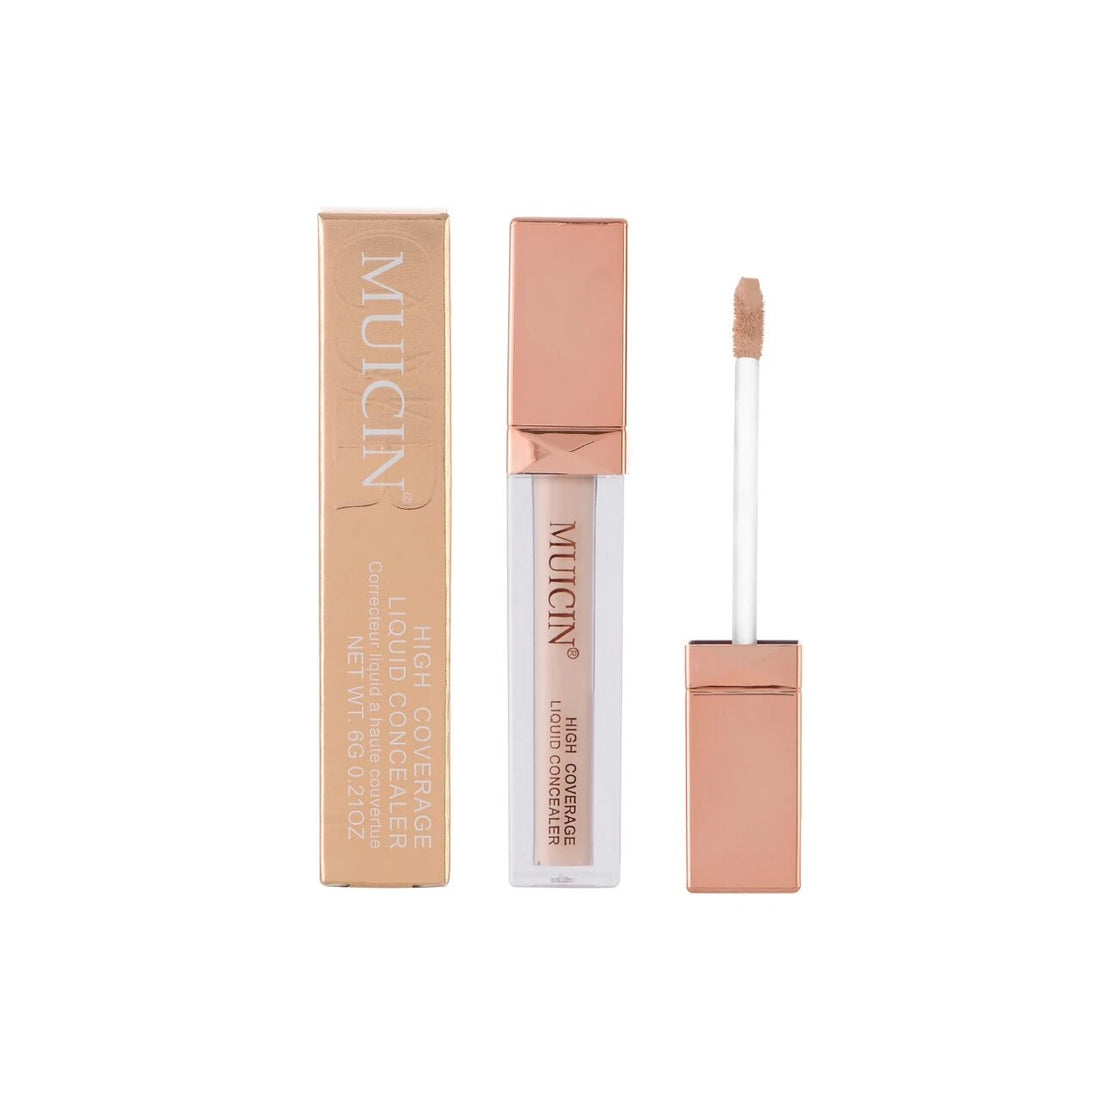 Gold Hd Coverage Liquid Concealer - 6G Nude